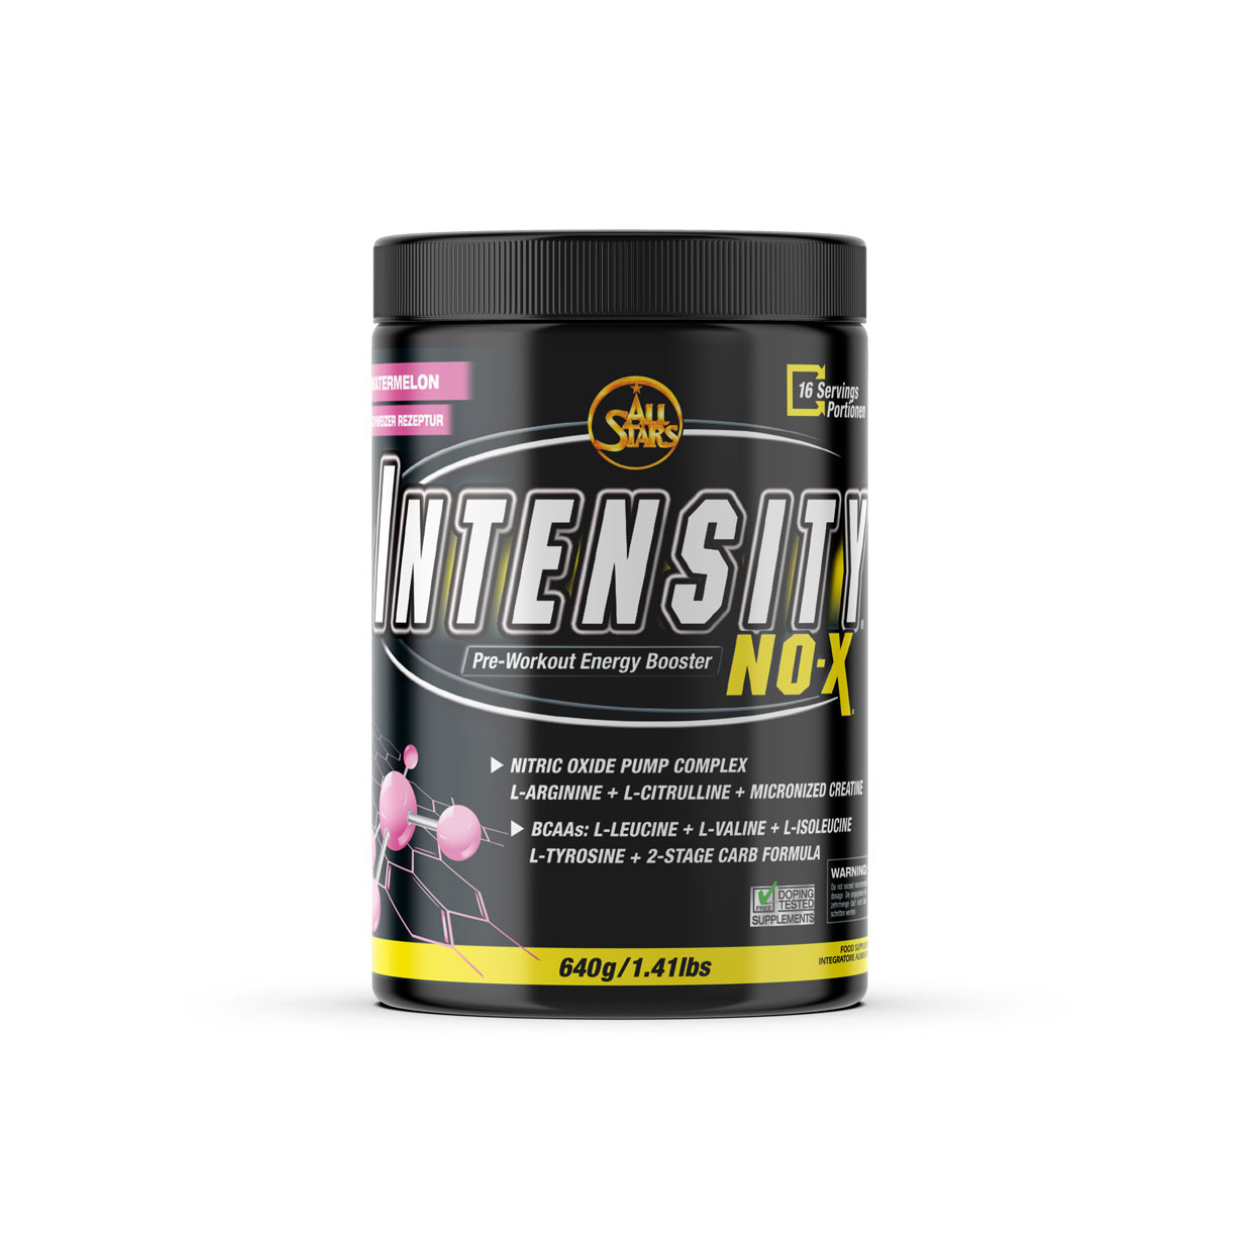 All Stars Intensity Pre-Workout Booster NO-X Watermelon (640g Dose)